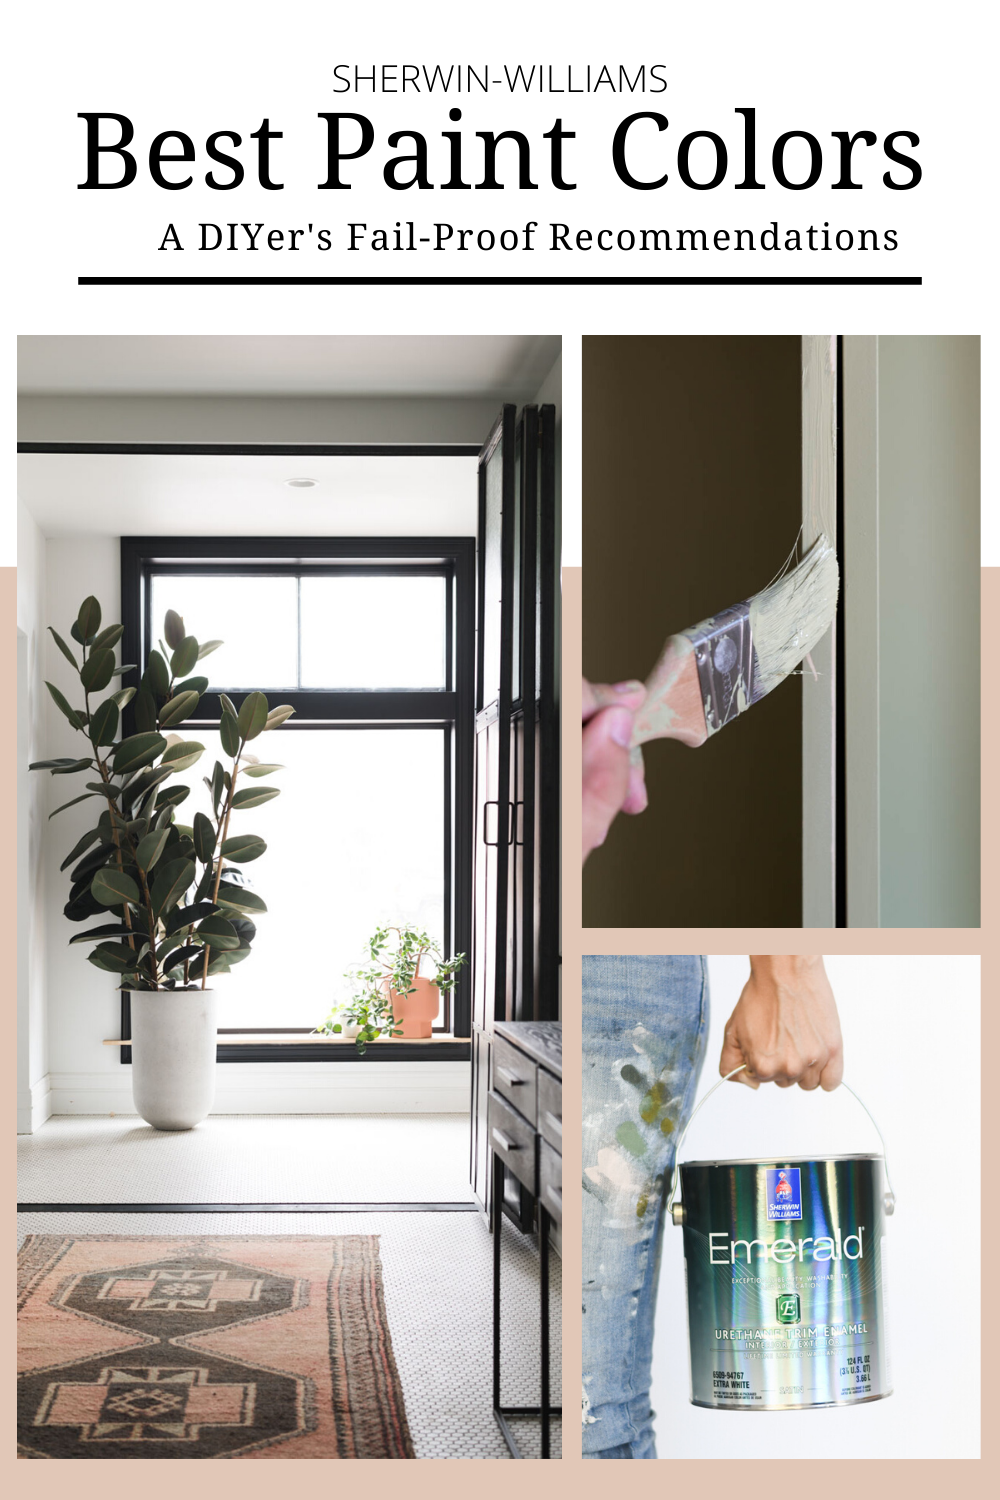 Sherwin-Williams Best Paint Colors + Sherwin Williams Coupon